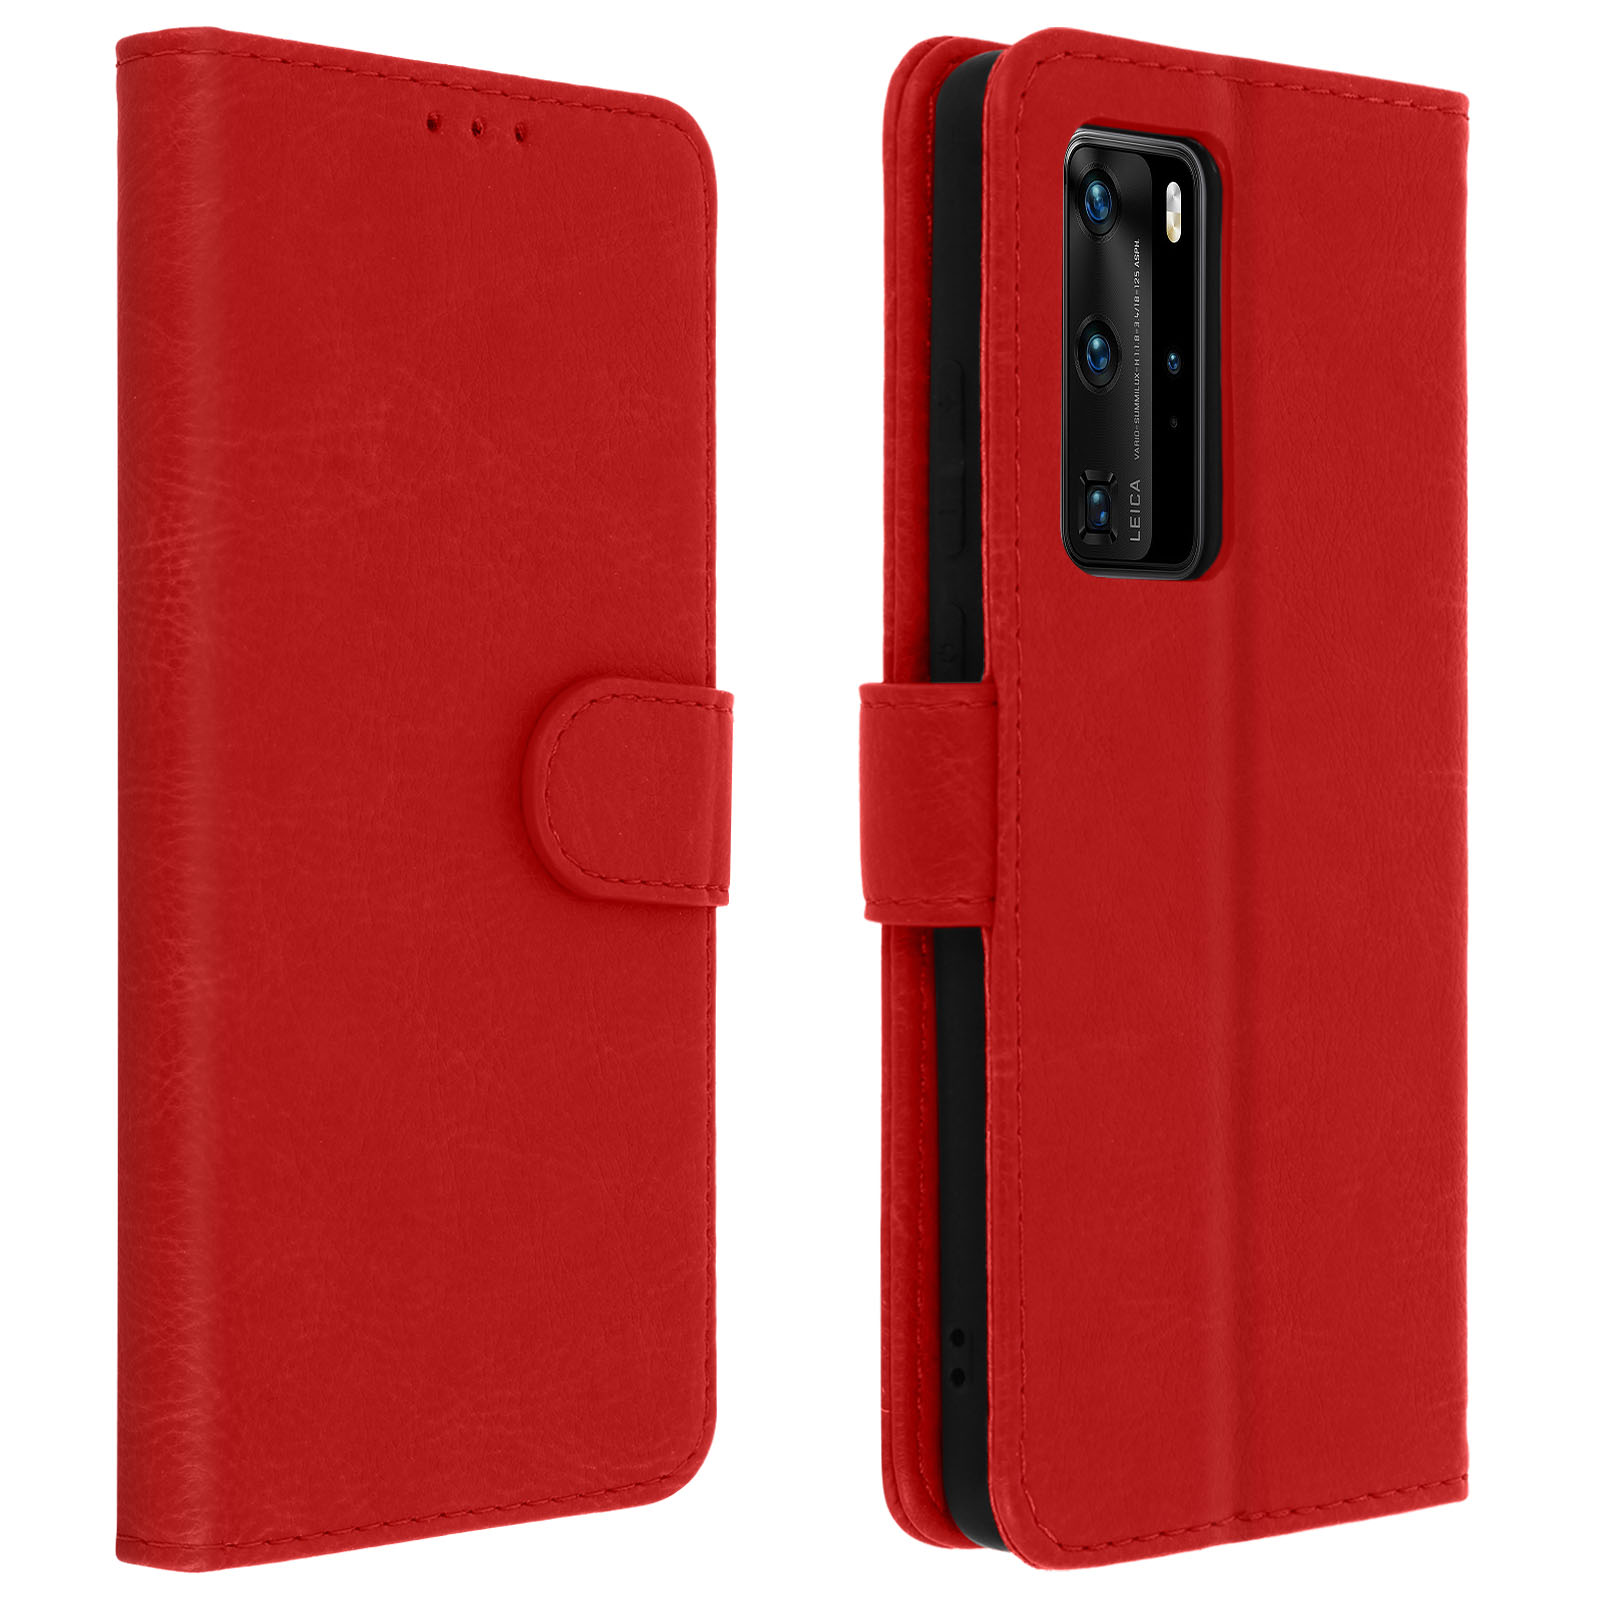 Pro, Bookcover, Huawei, Series, Rot AVIZAR Chester P40